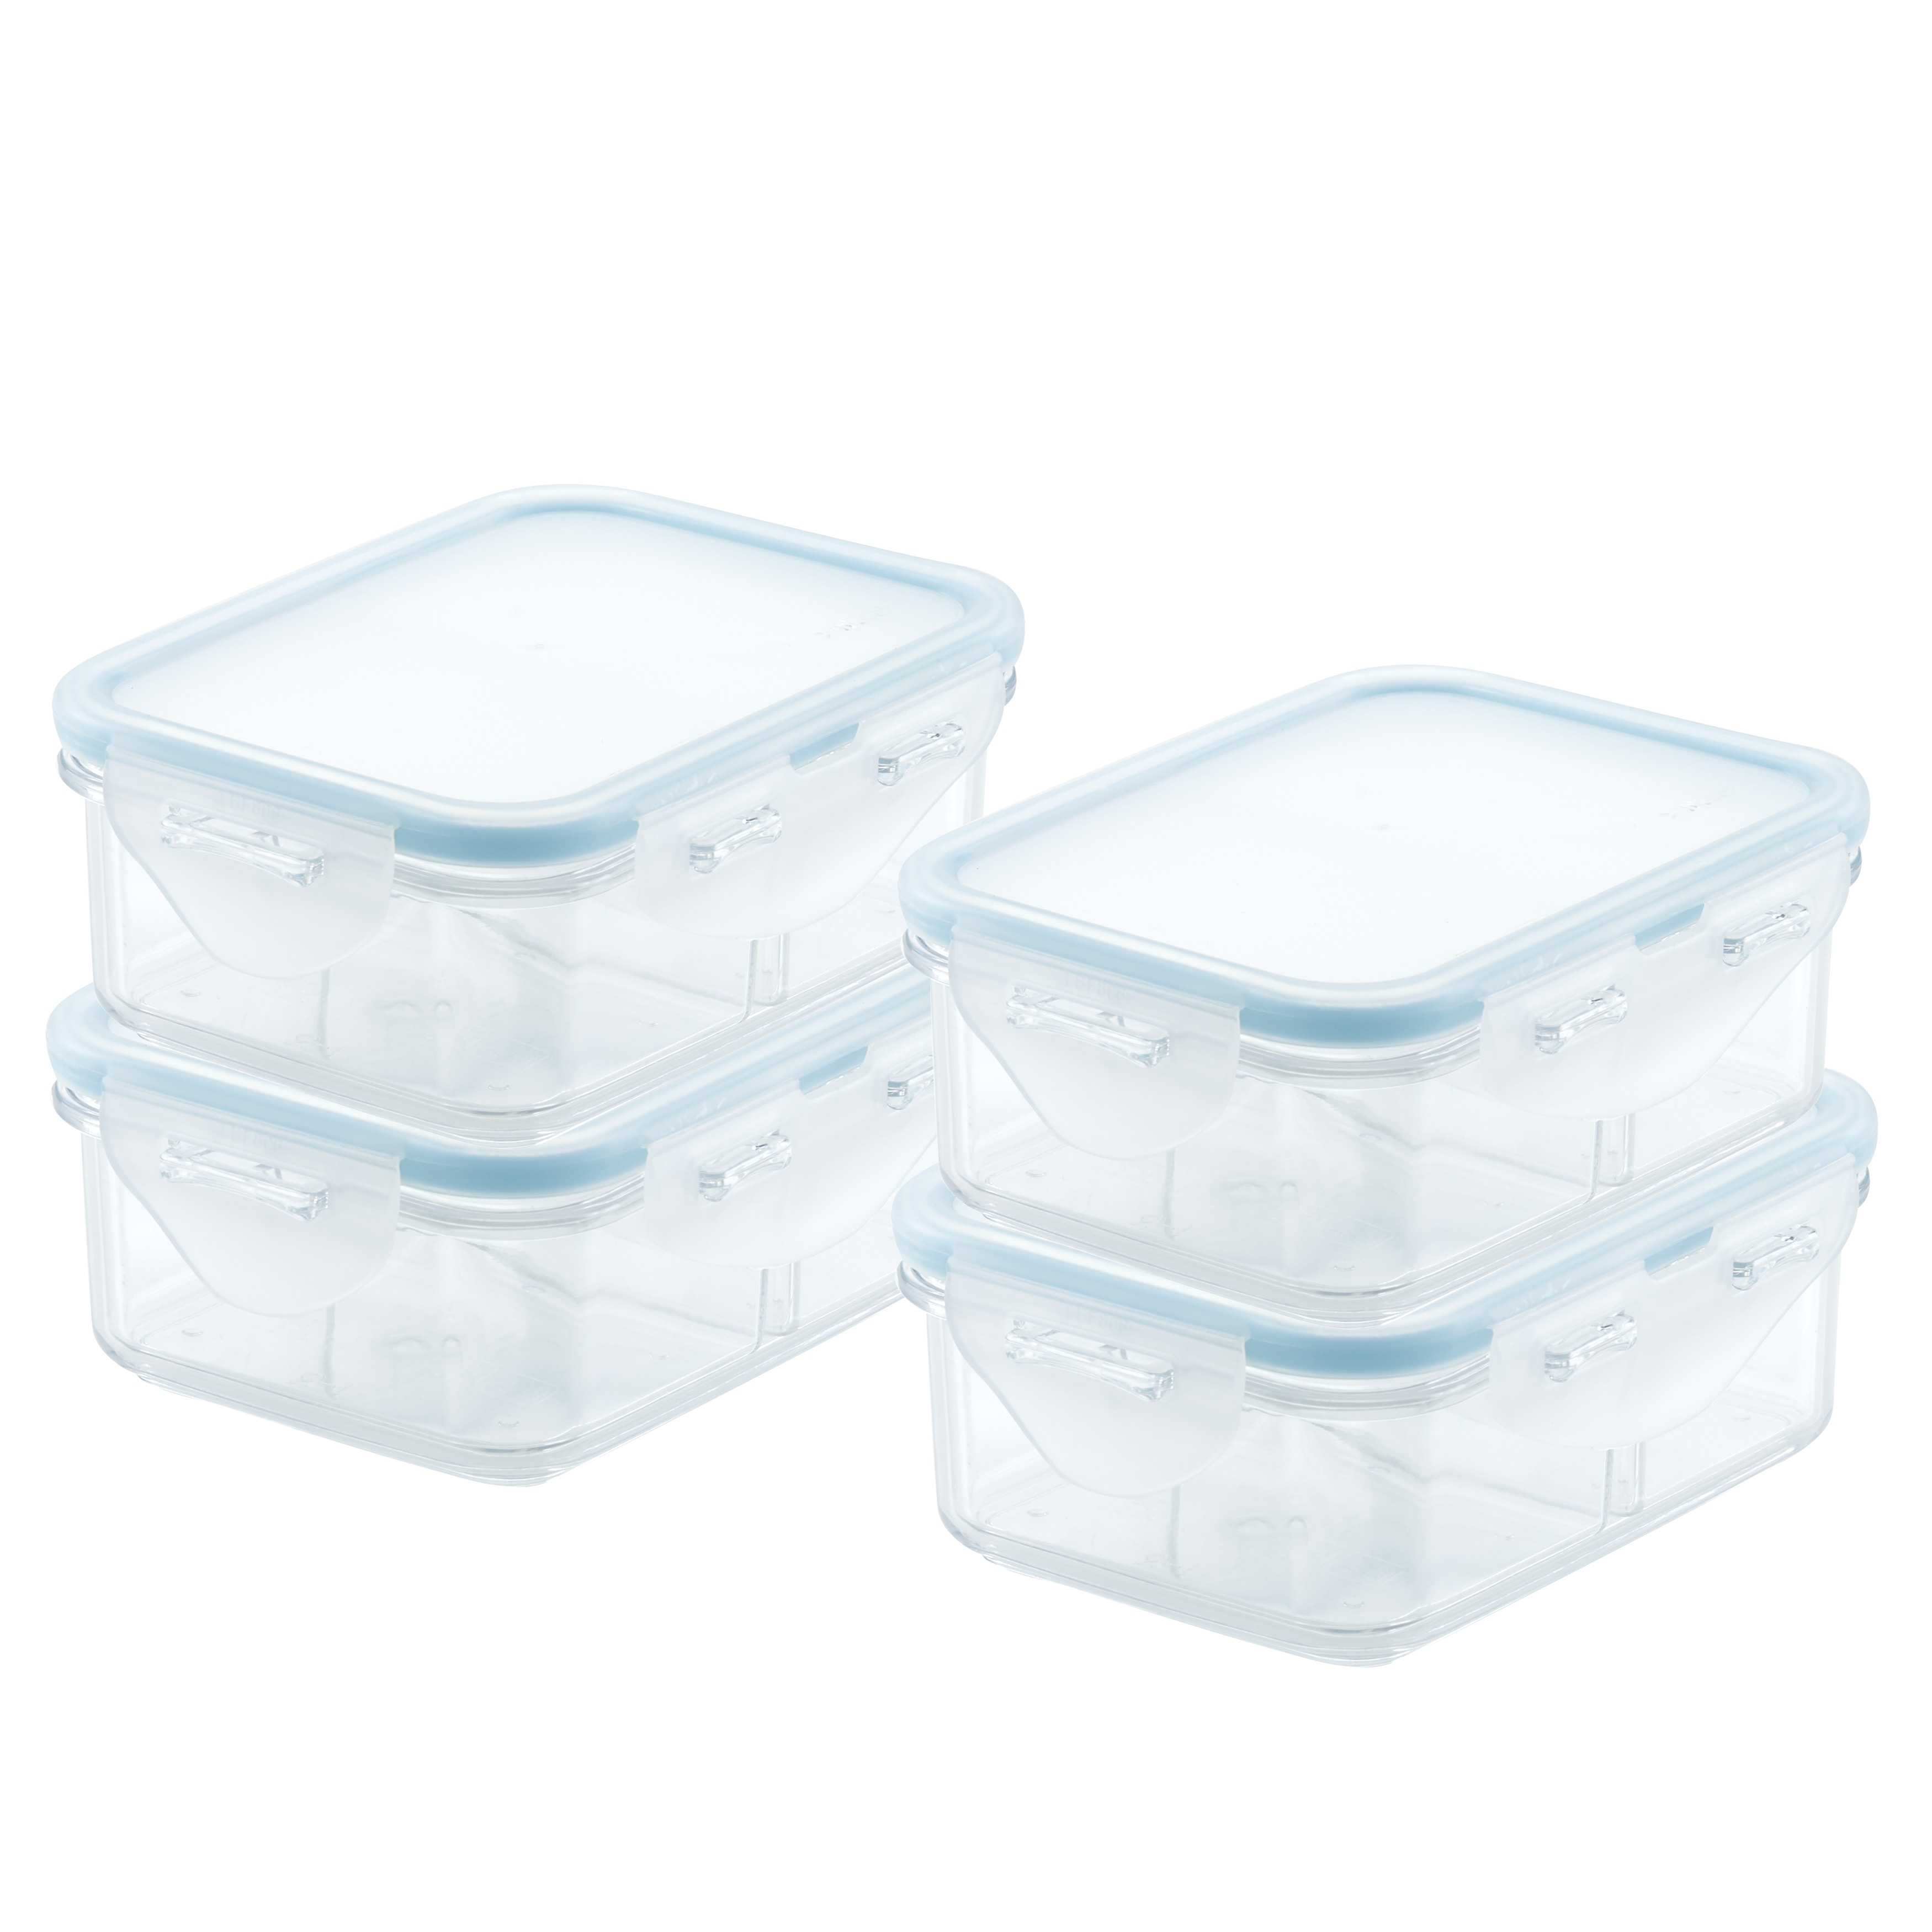 https://ak1.ostkcdn.com/images/products/is/images/direct/1c1a9bbef5aaac0d691f65c1efef8e8ca4601ac2/LocknLock-Purely-Better-Rectangular-Food-Storage-Containers-with-Dividers%2C-12-Ounce%2C-Set-of-4.jpg